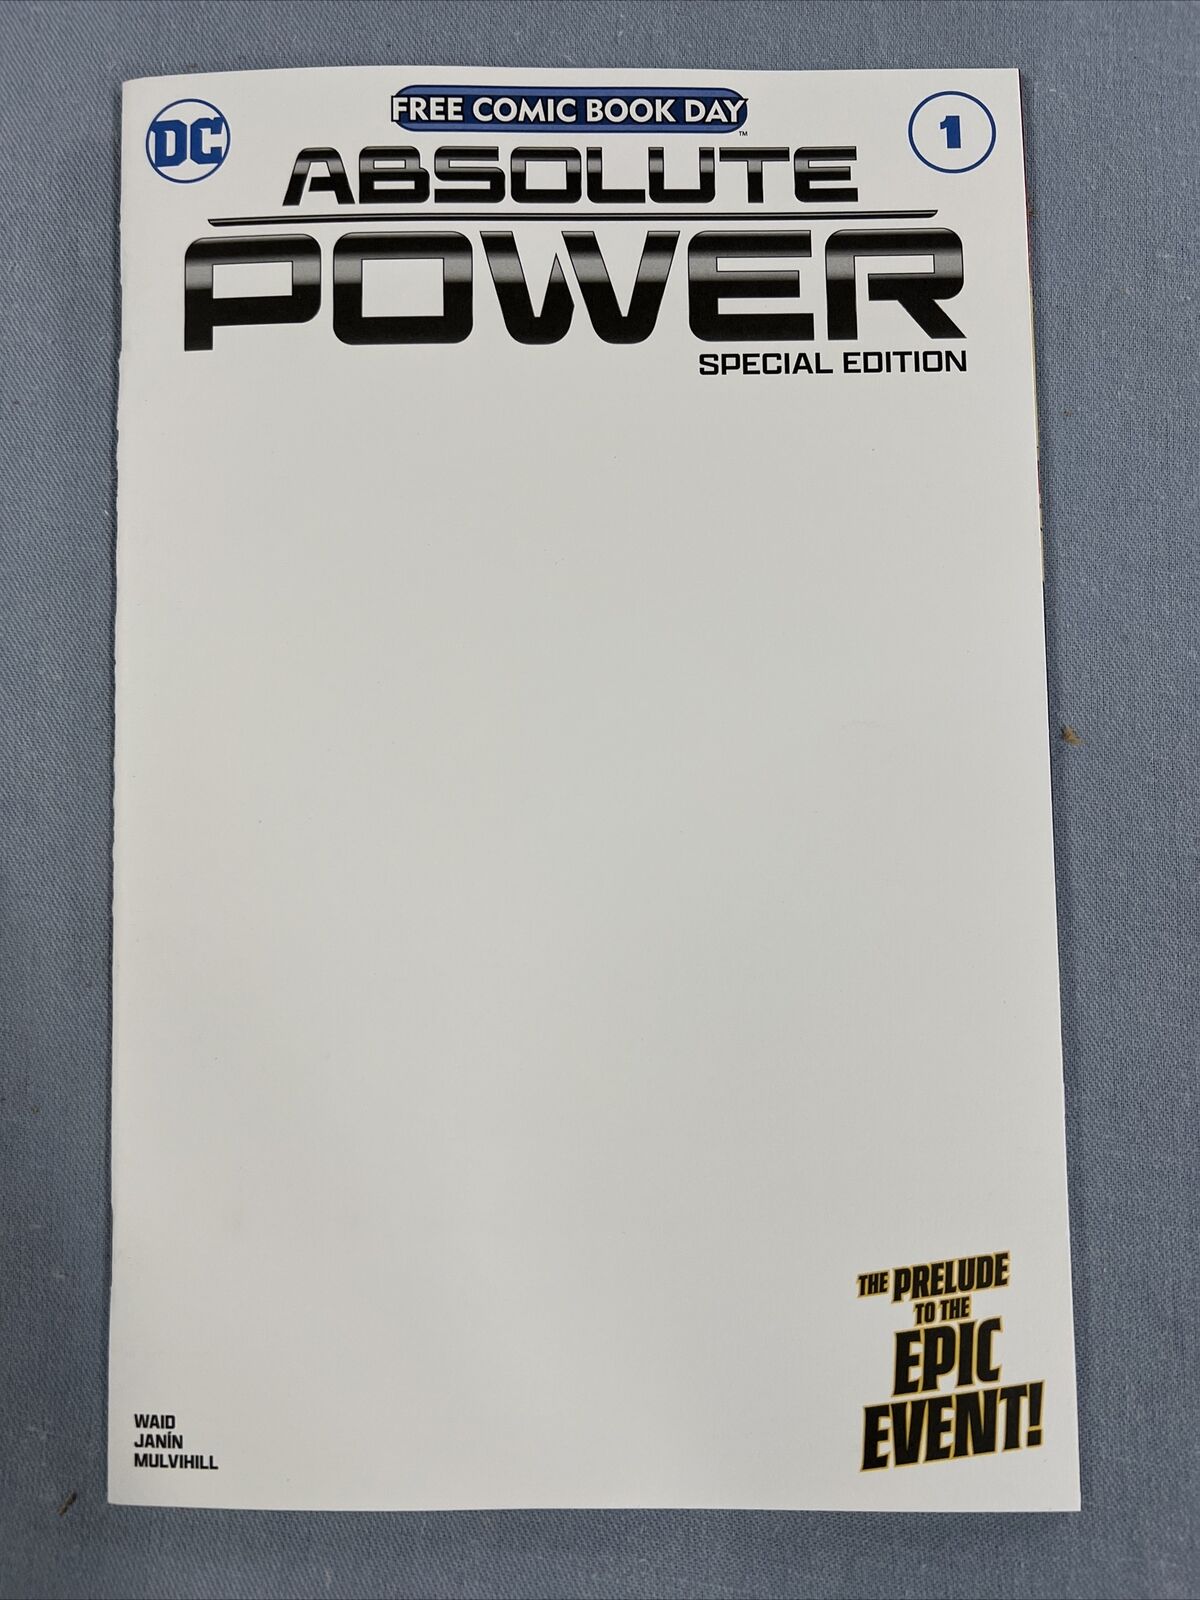 DC Comics FCBD 2024 - ABSOLUTE POWER #1 SPECIAL EDITION BLANK Variant Cover